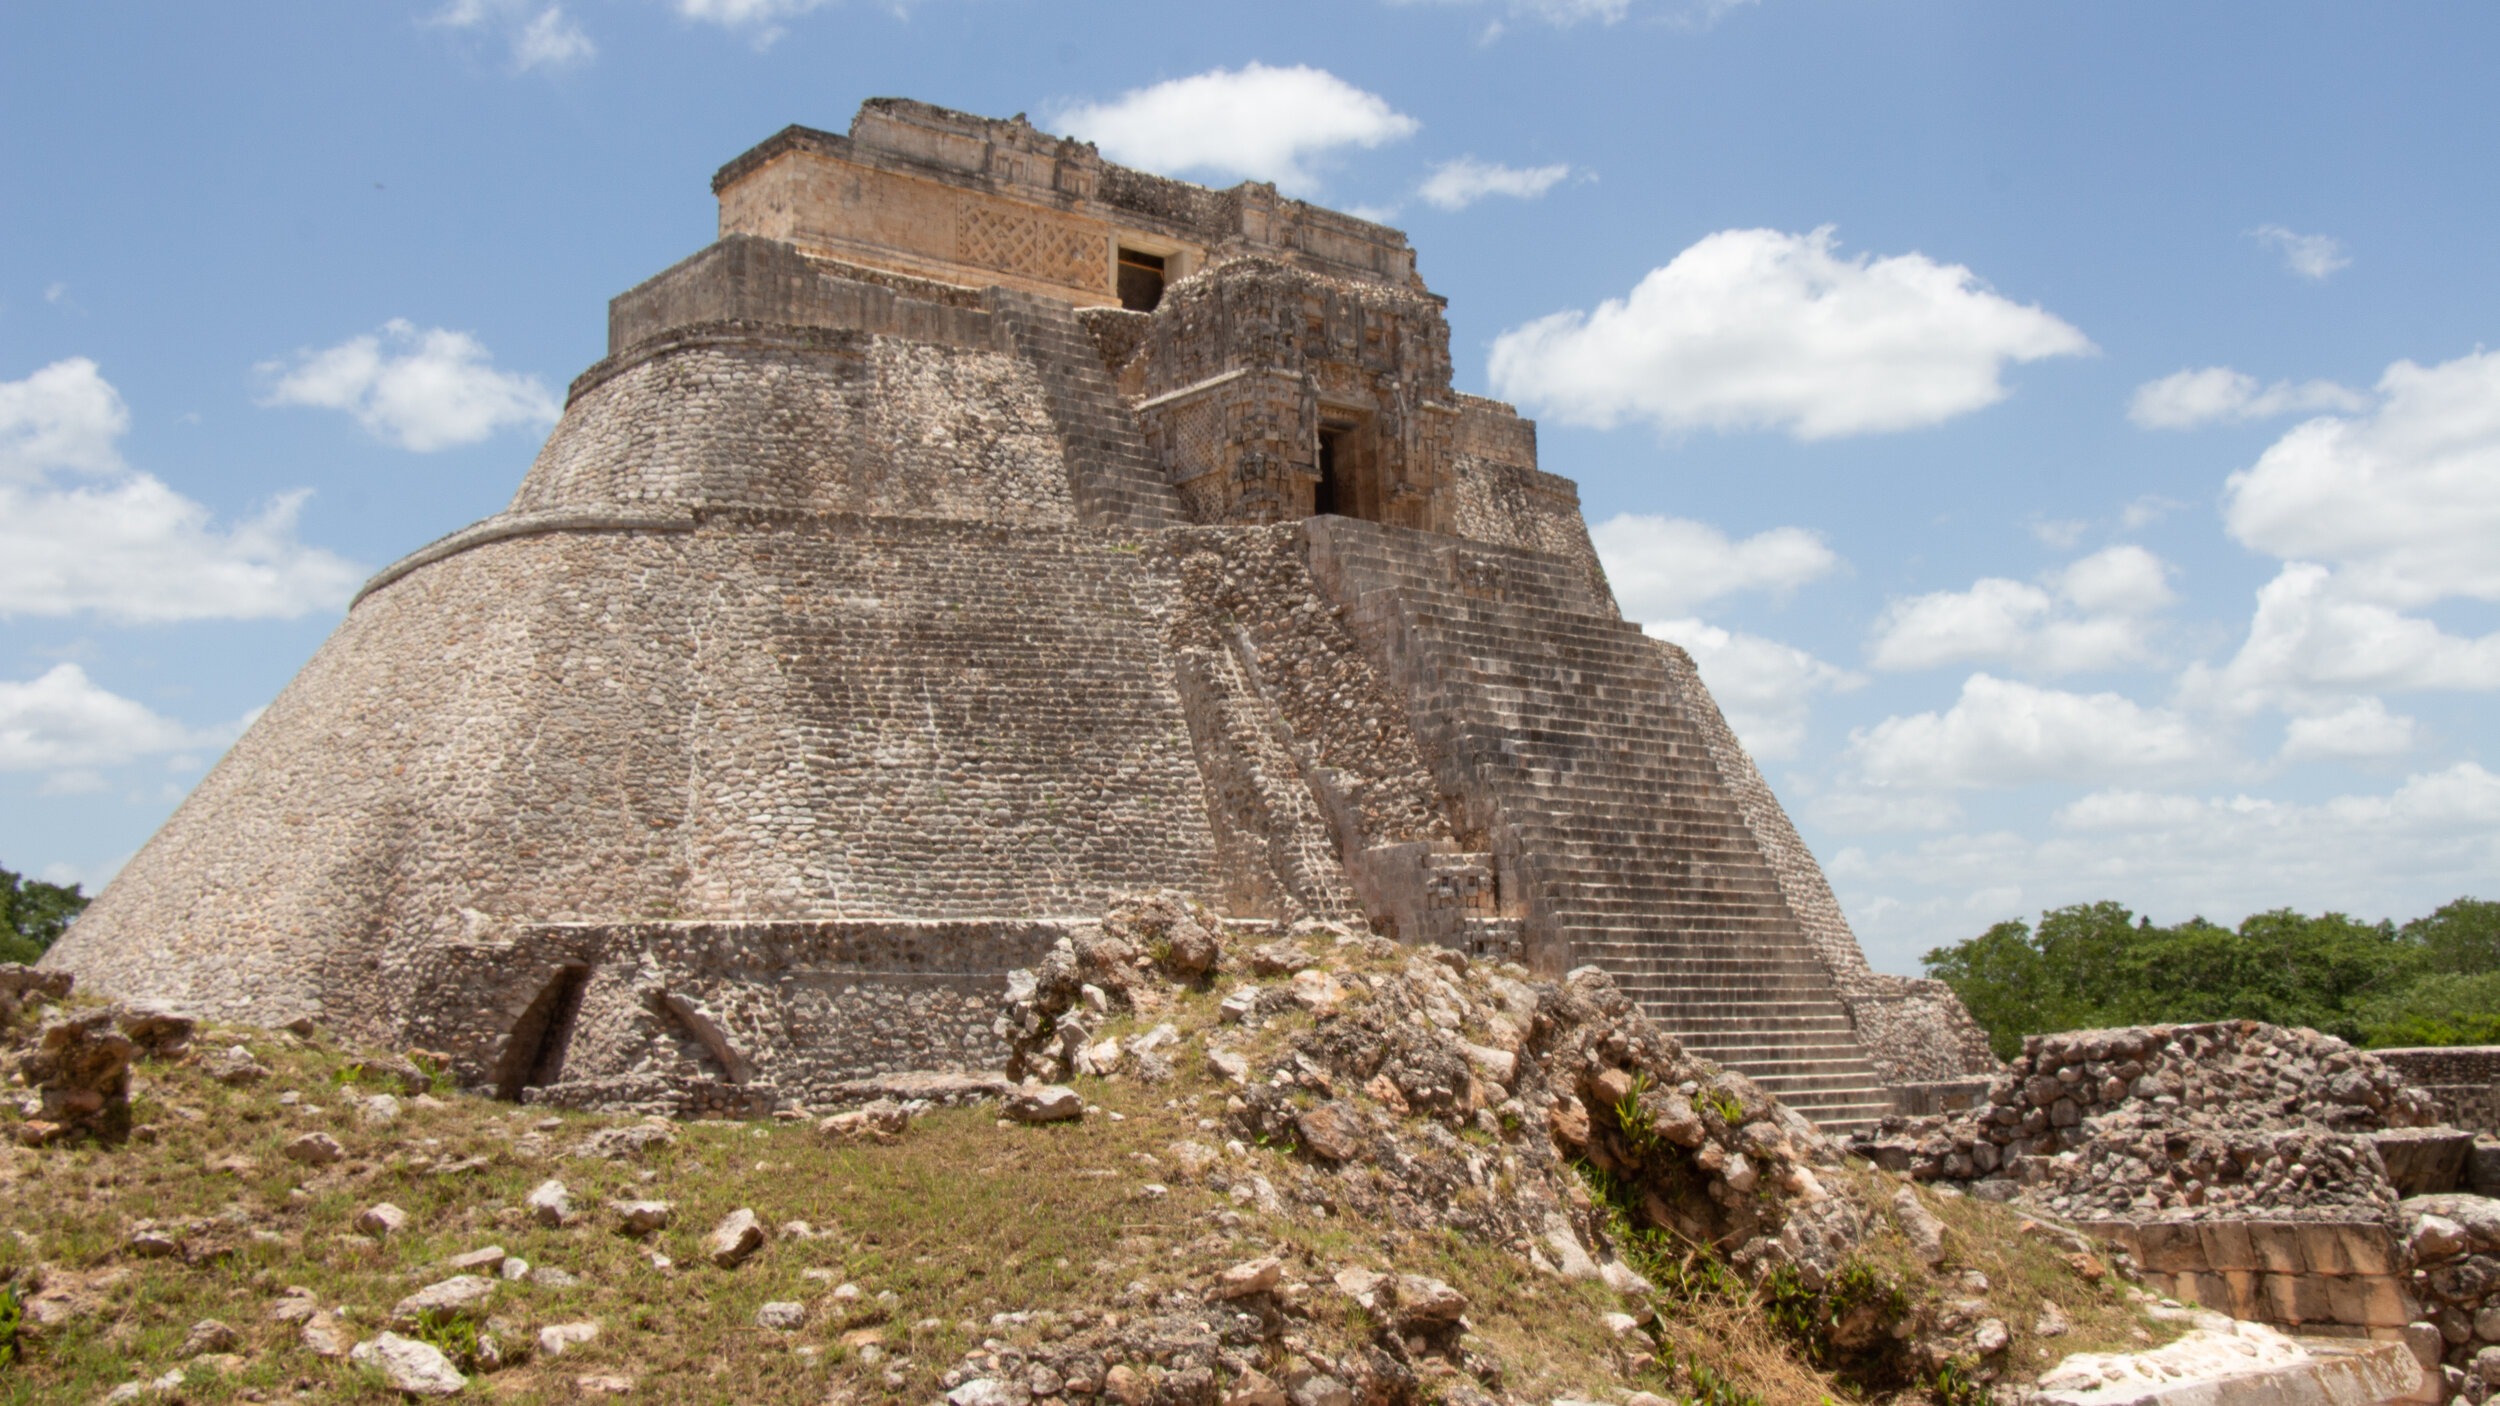  - The Temple of the Soothsayer, Uxmal Archaeological Site, Yucatan, Mexico. This Maya temple was built in five stages, from 400 to 800 CE. (Photo Credit: Mateo Hinojosa, The Cultural Conservancy)